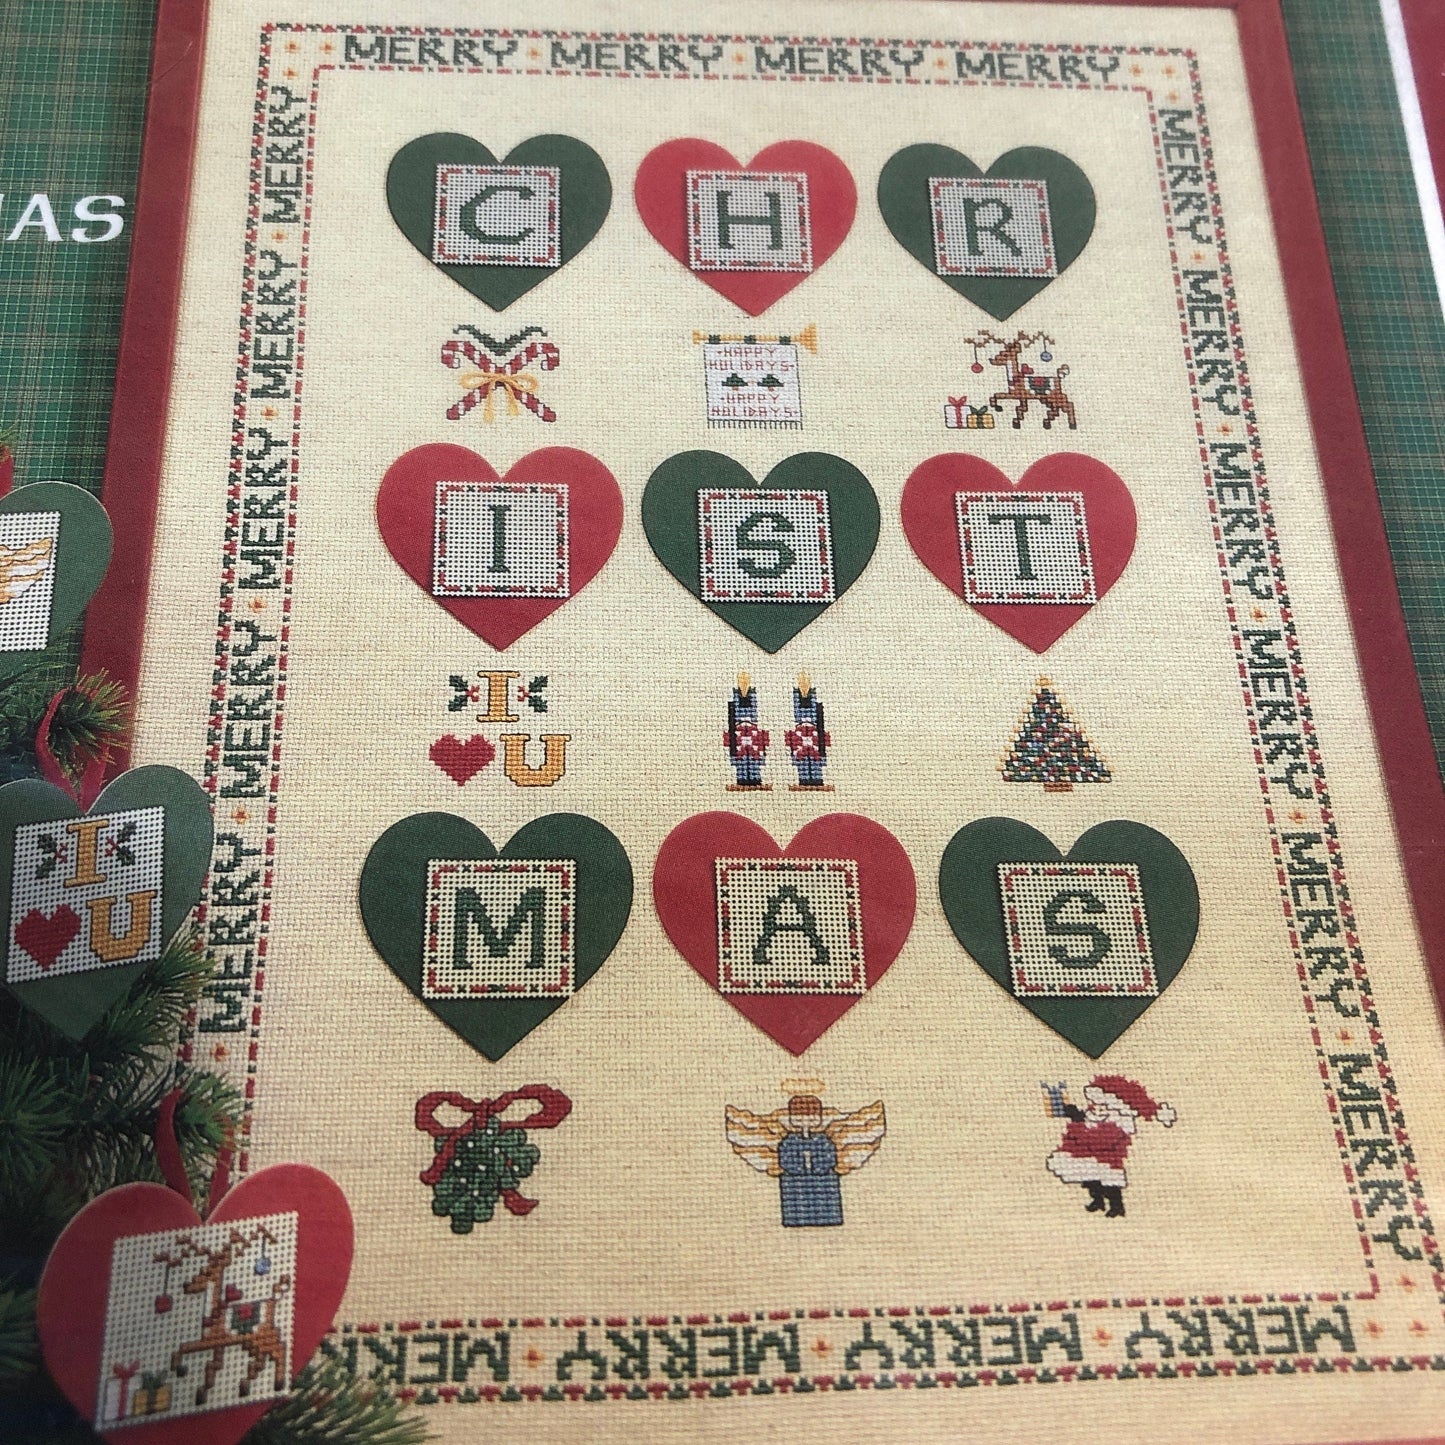 June Grigg, I Love Christmas, 21, Vintage 1987, Counted Cross Stitch Chart, Heart Cut Outs Included